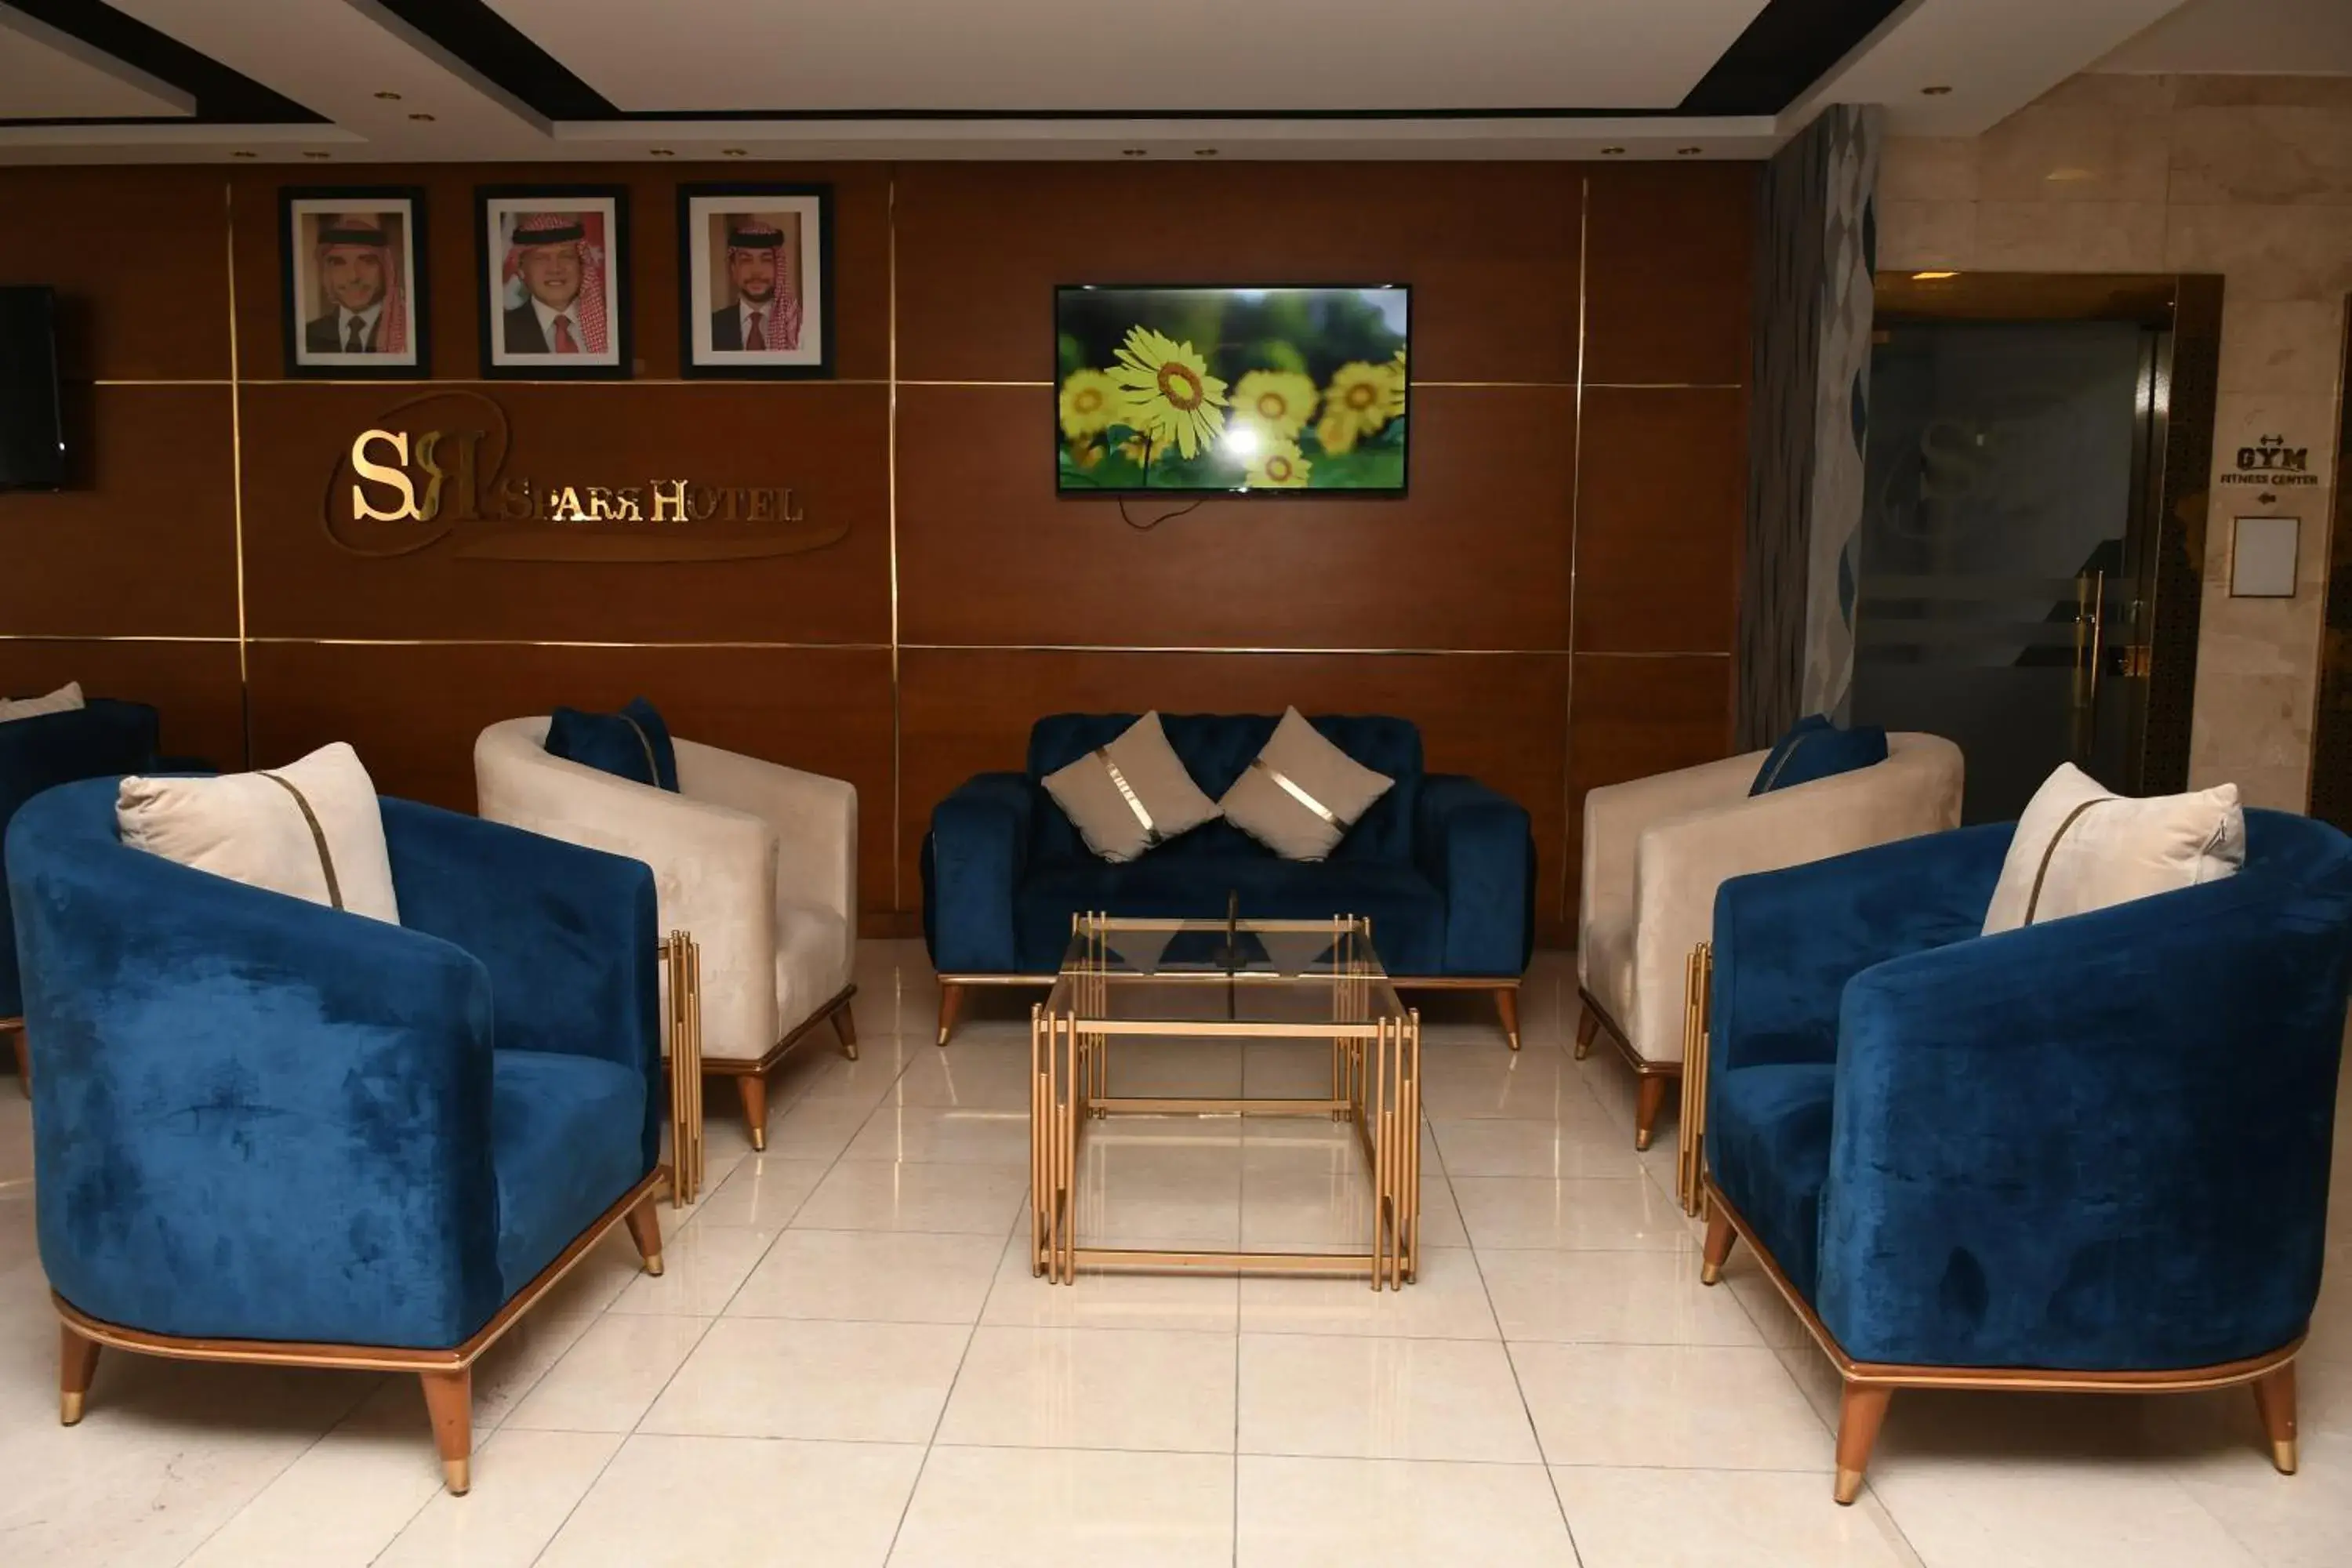 Seating area, Lounge/Bar in Sparr Hotel